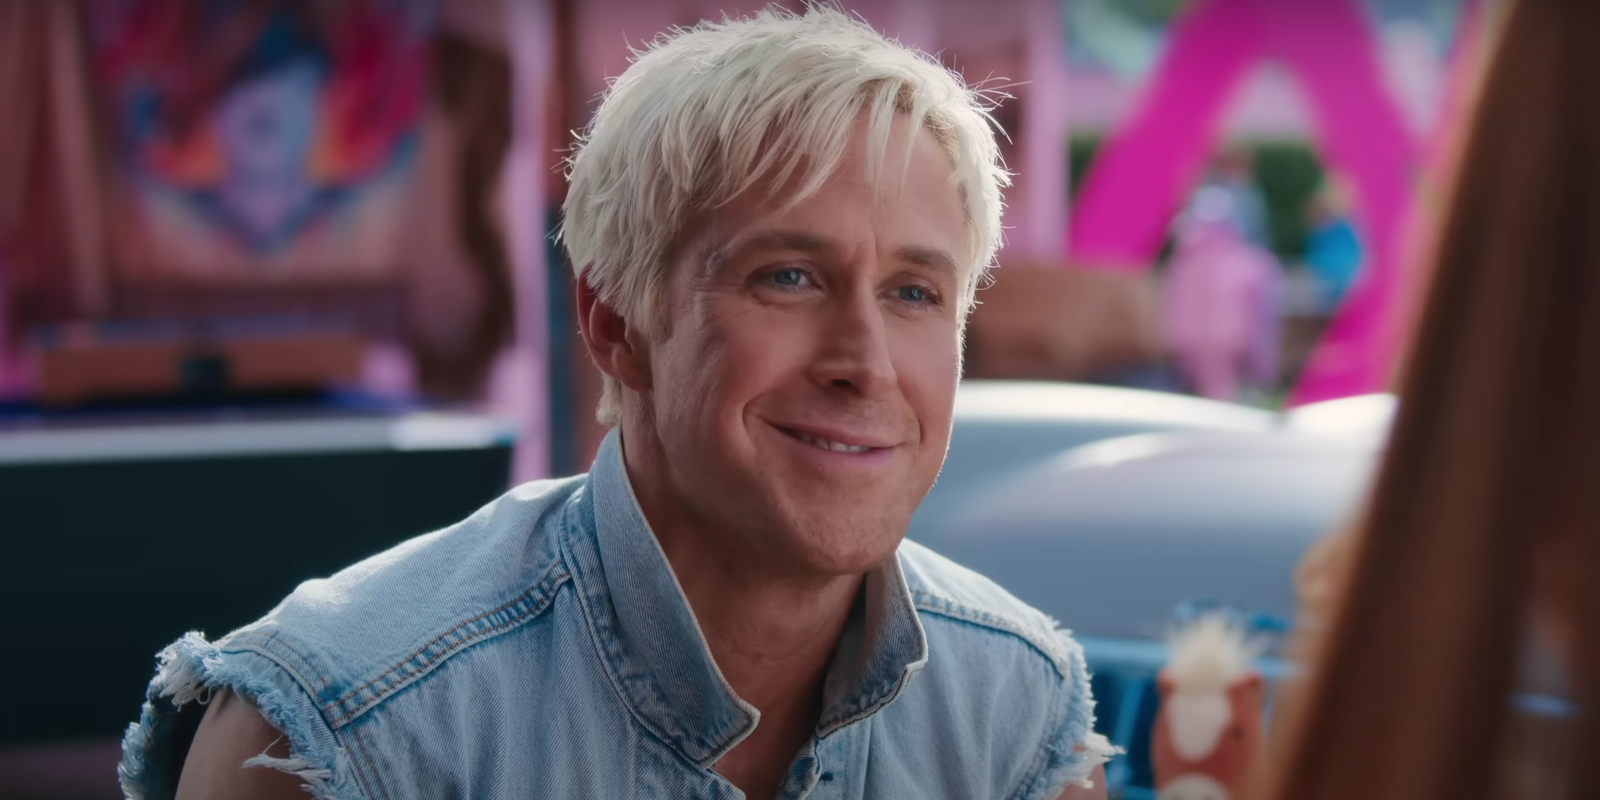 Ken wearing a denim vest while smiling in the Barbie movie